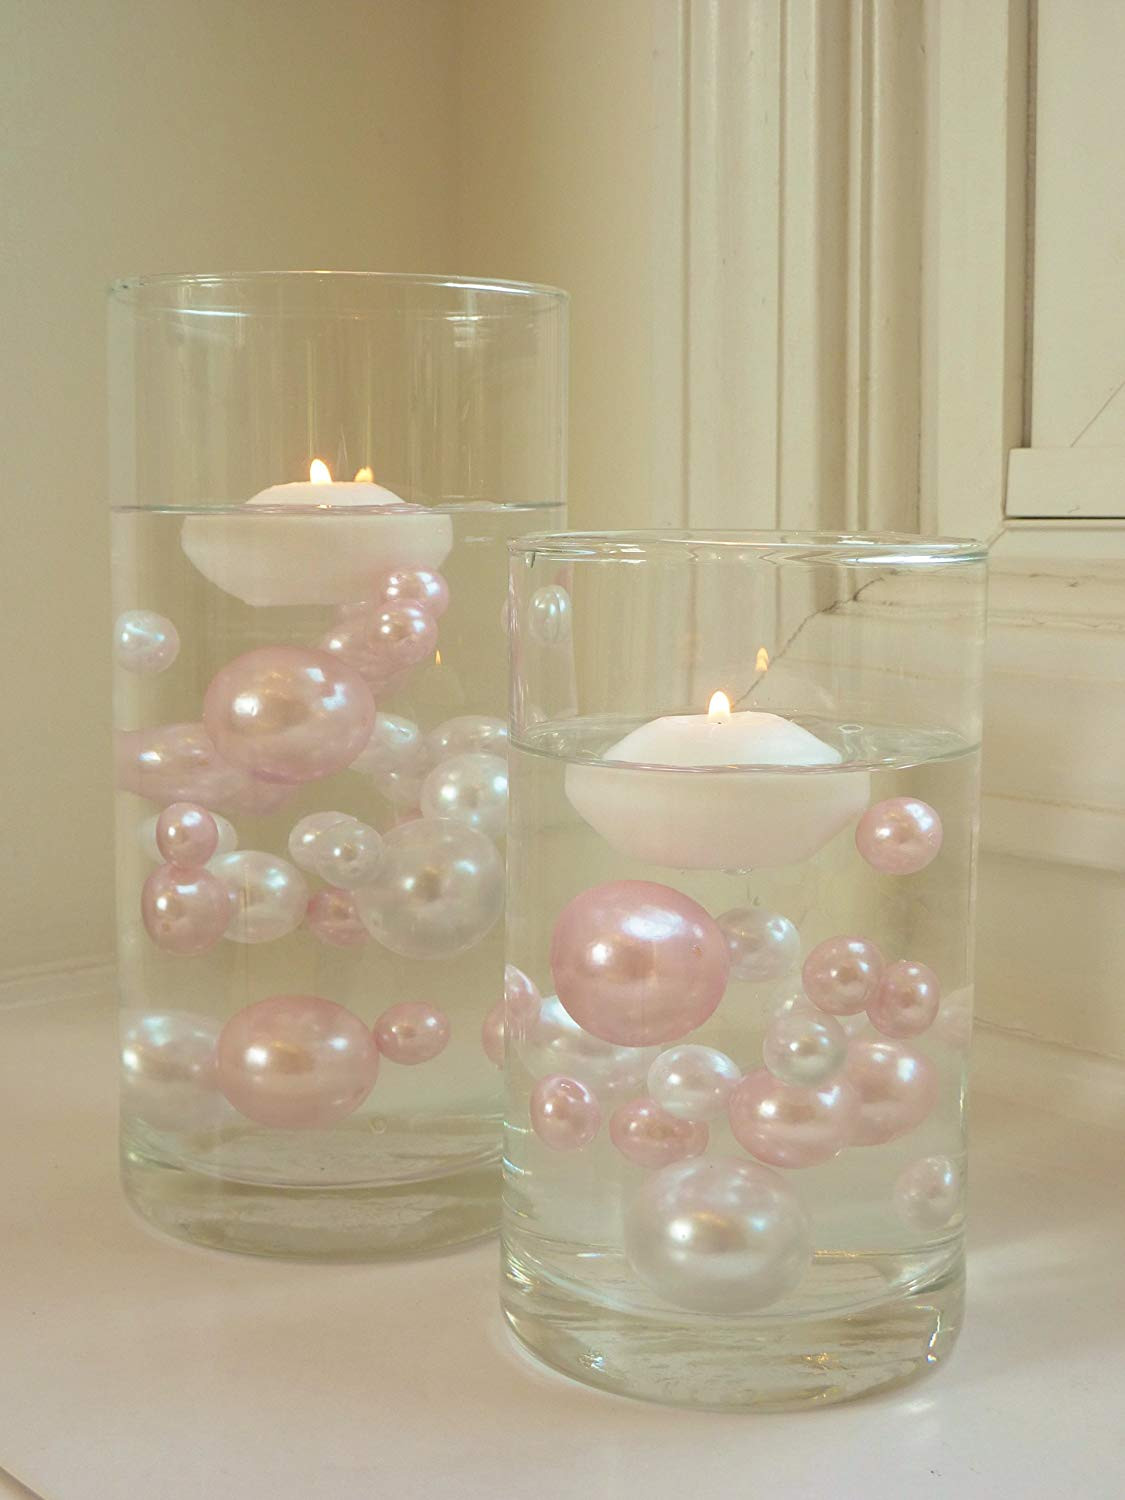 14 Famous Floating Vase Fillers 2022 free download floating vase fillers of vase fillers for centerpieces www topsimages com throughout light pink pearls jumbo and assorted sizes vase fillers for decorating centerpieces to float the pearls